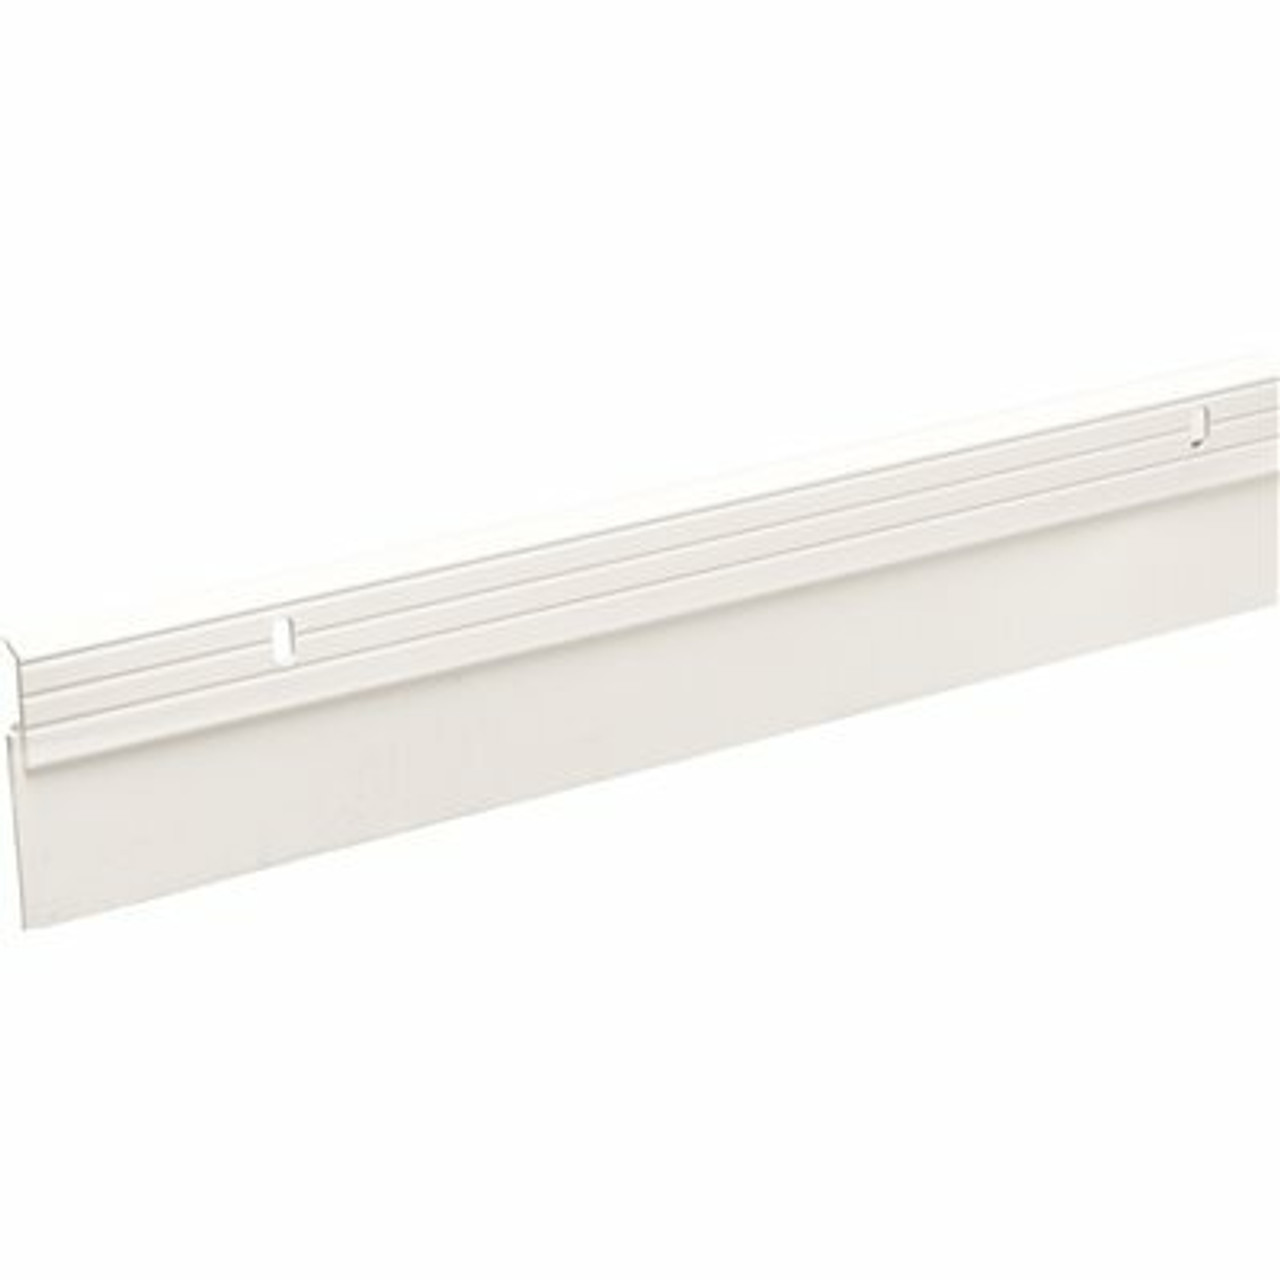 Frost King 2 In. X 36 In. White Premium And Reinforced Rubber Door Sweep